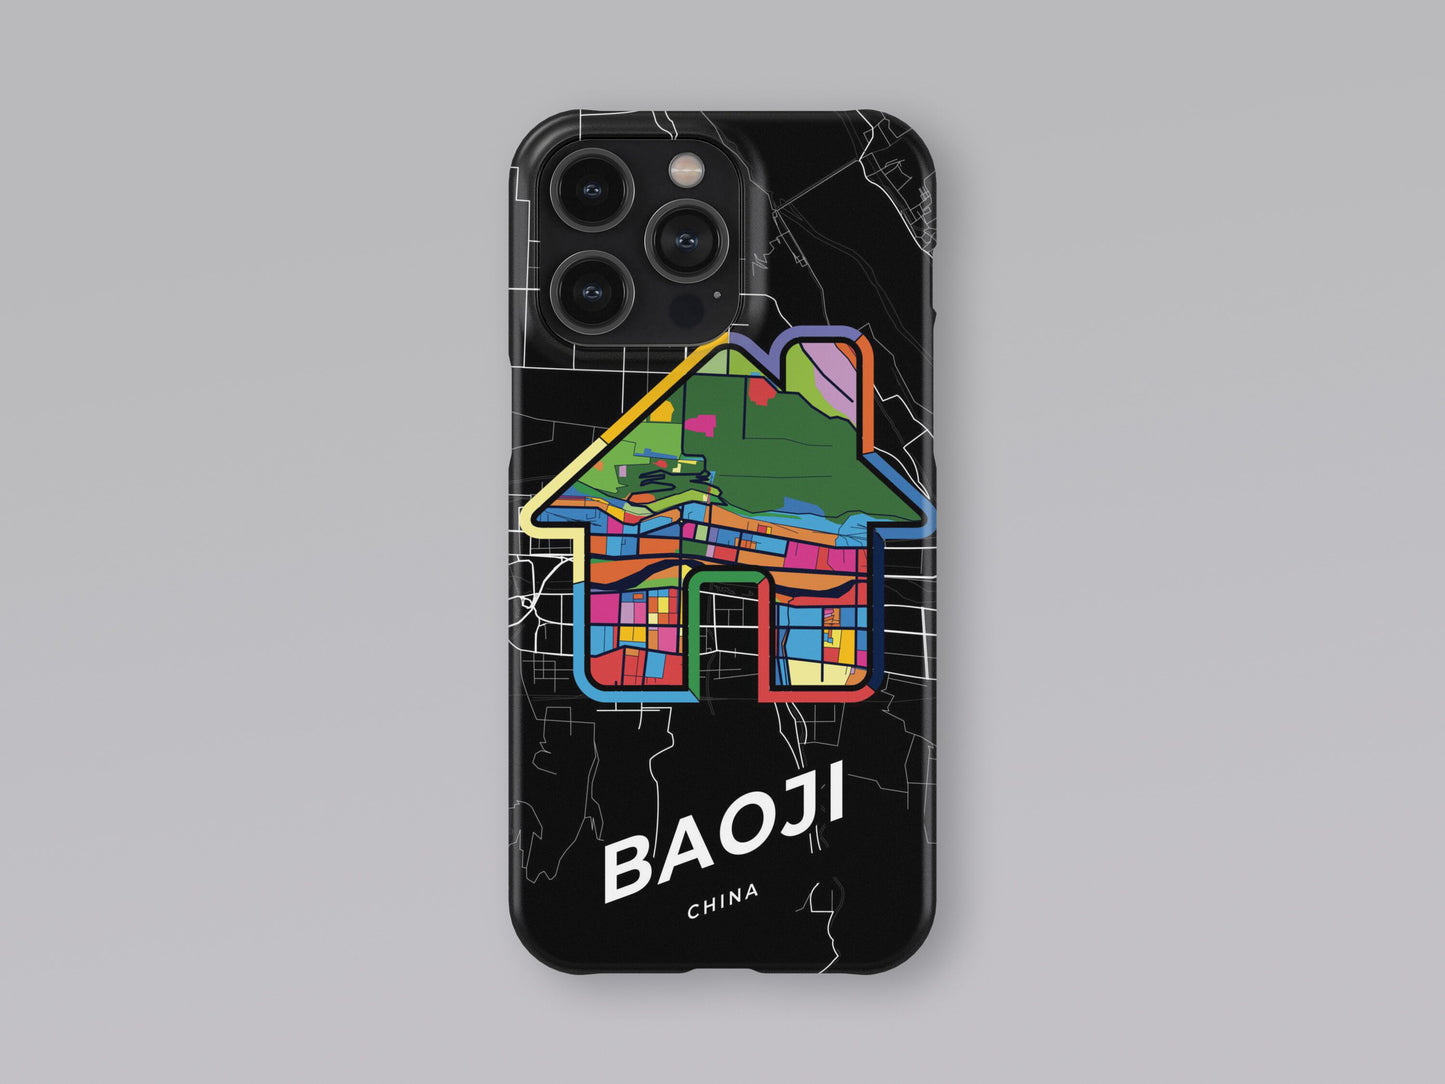 Baoji China slim phone case with colorful icon. Birthday, wedding or housewarming gift. Couple match cases. 3